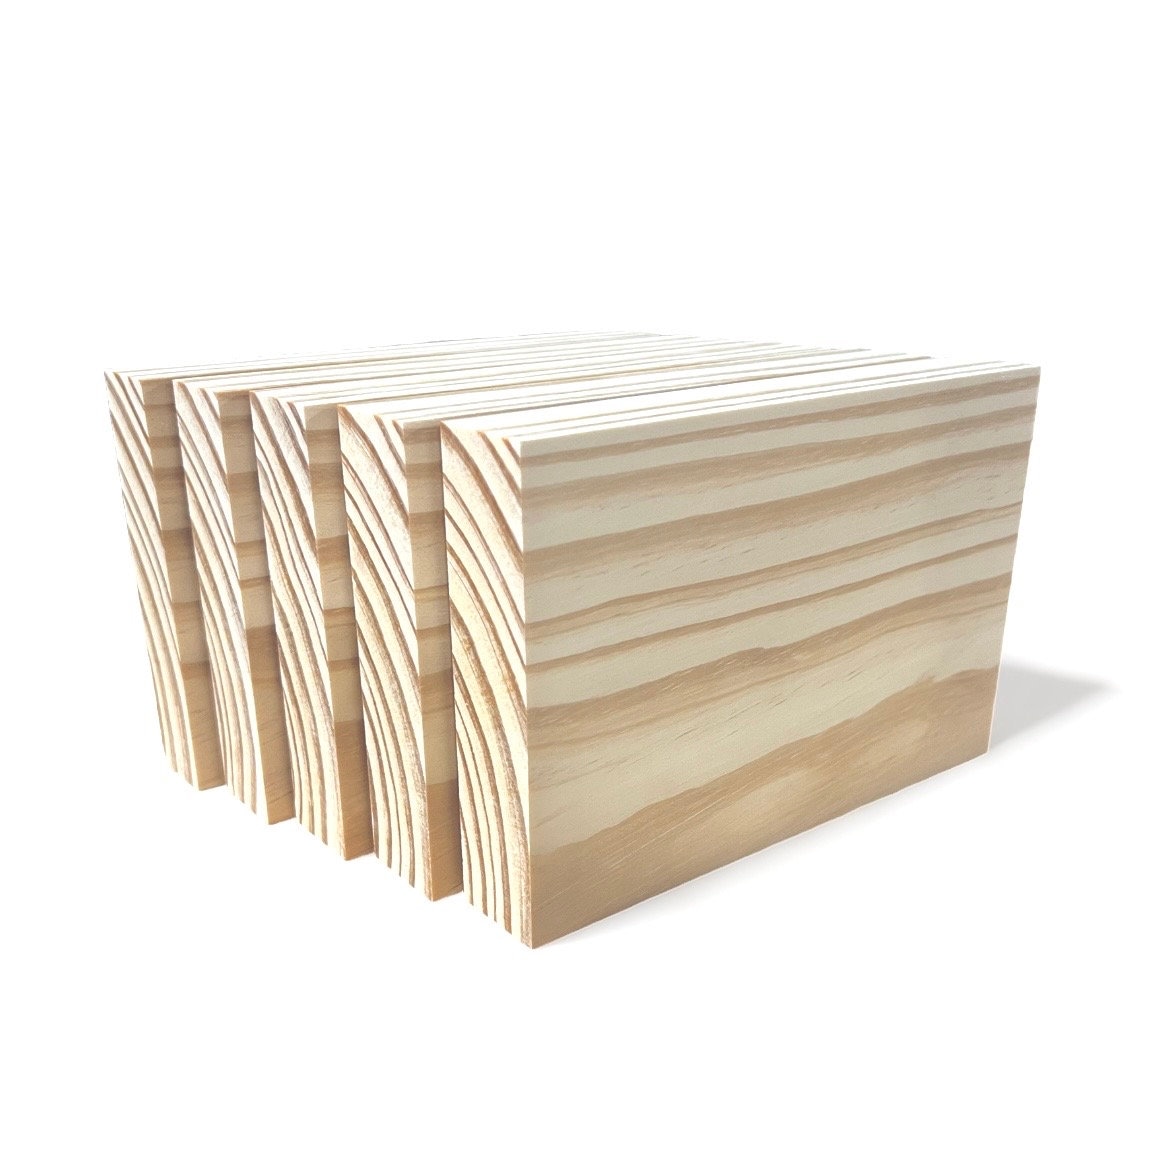 Basswood Carving Blocks - Variety Pack - 1.25 - 1.5 thick 23.5